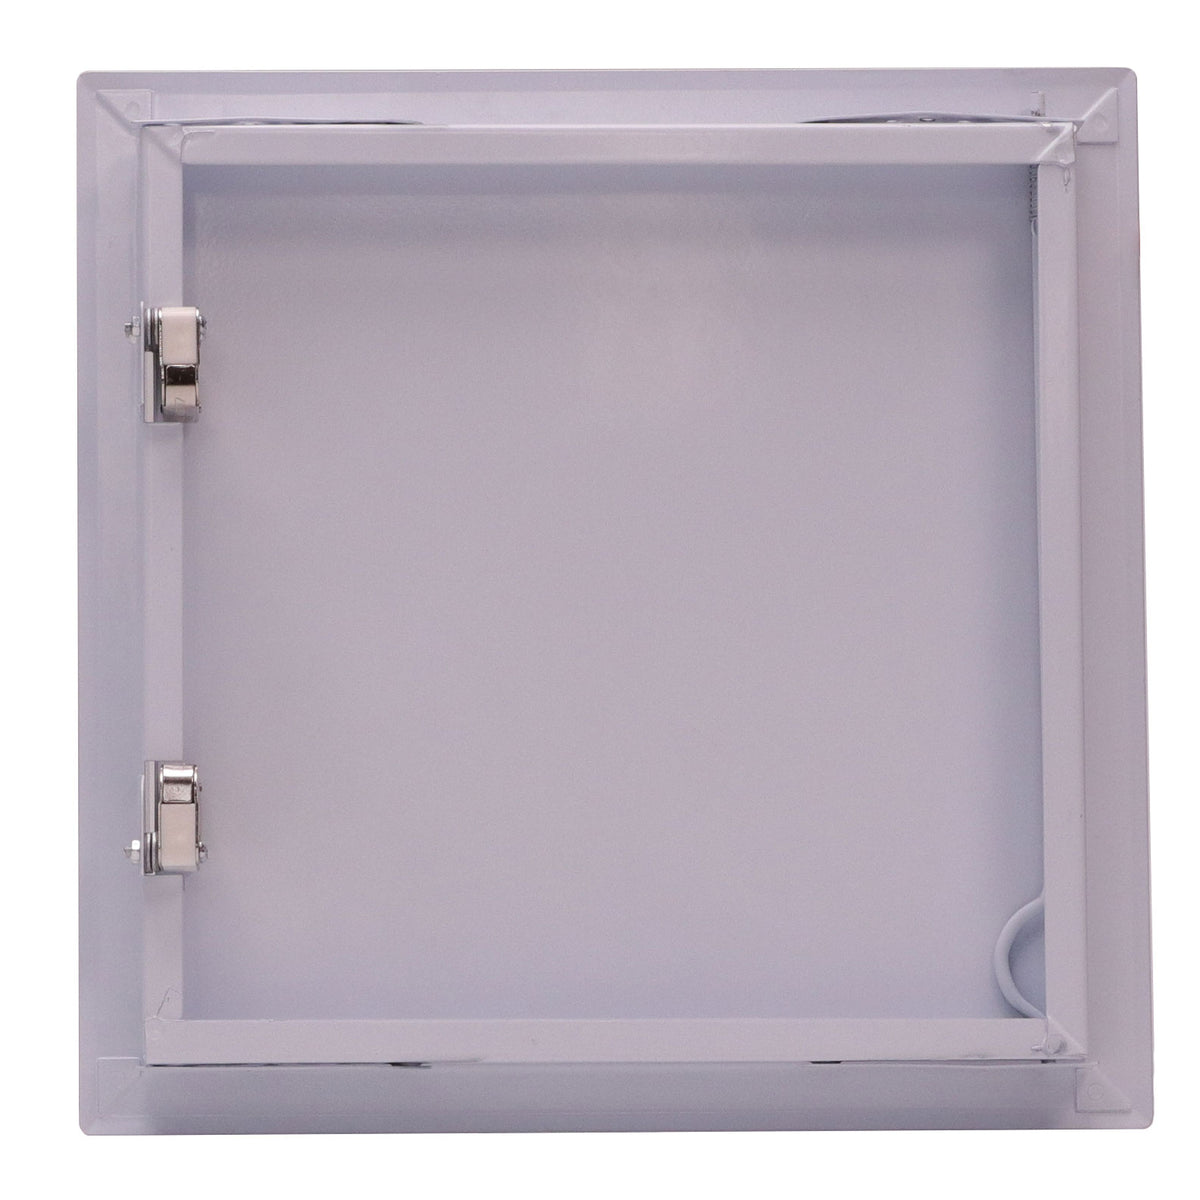 24&quot; X 24&quot; Universal Aluminum Access Panel Door For Wall / Ceiling Application (Push-Lock) With Solid Frame - [Outer Dimensions: 25&quot; Width X 25&quot; Height]